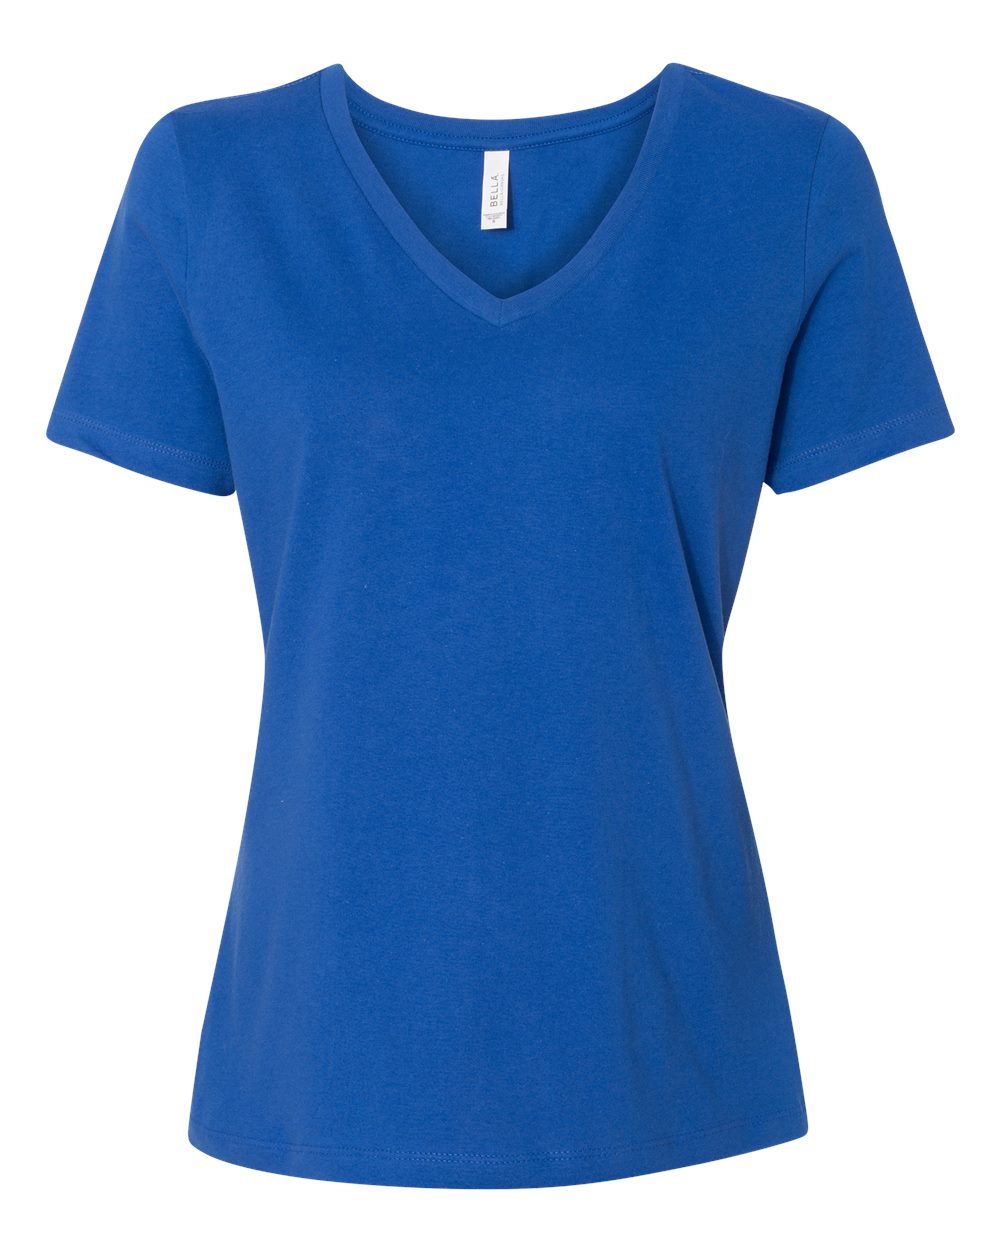 Bella + Canvas Women's Relaxed V-Neck Tee (6405) in True Royal